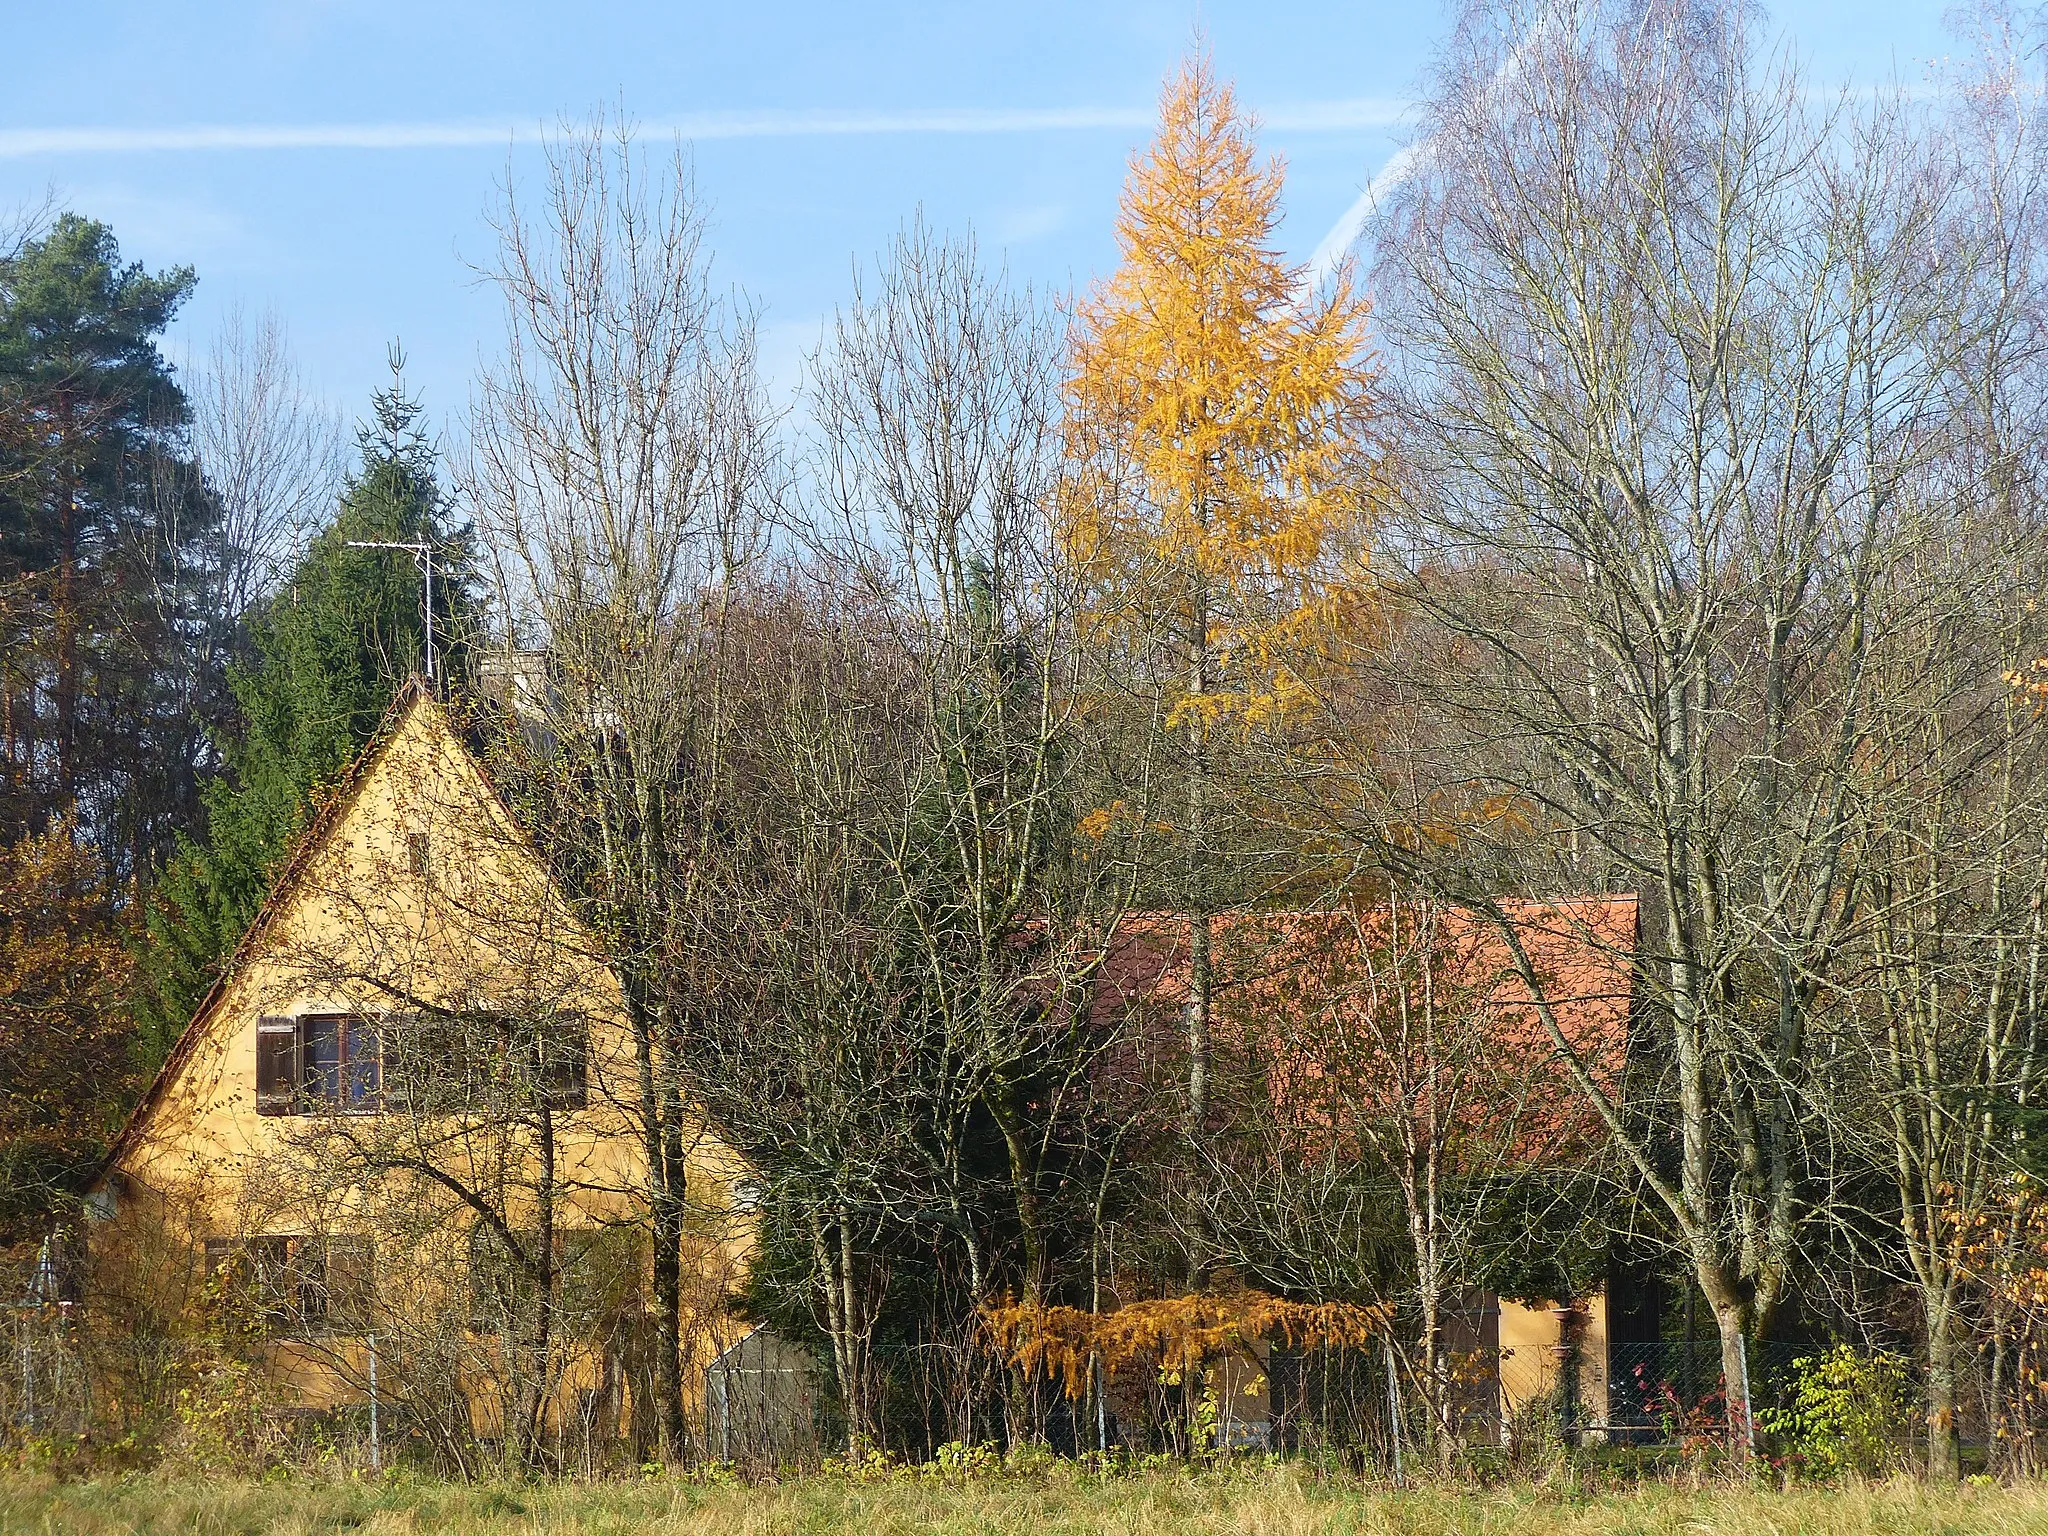 Photo showing: The solitude Forsthaus, part of the municipality of Leinburg